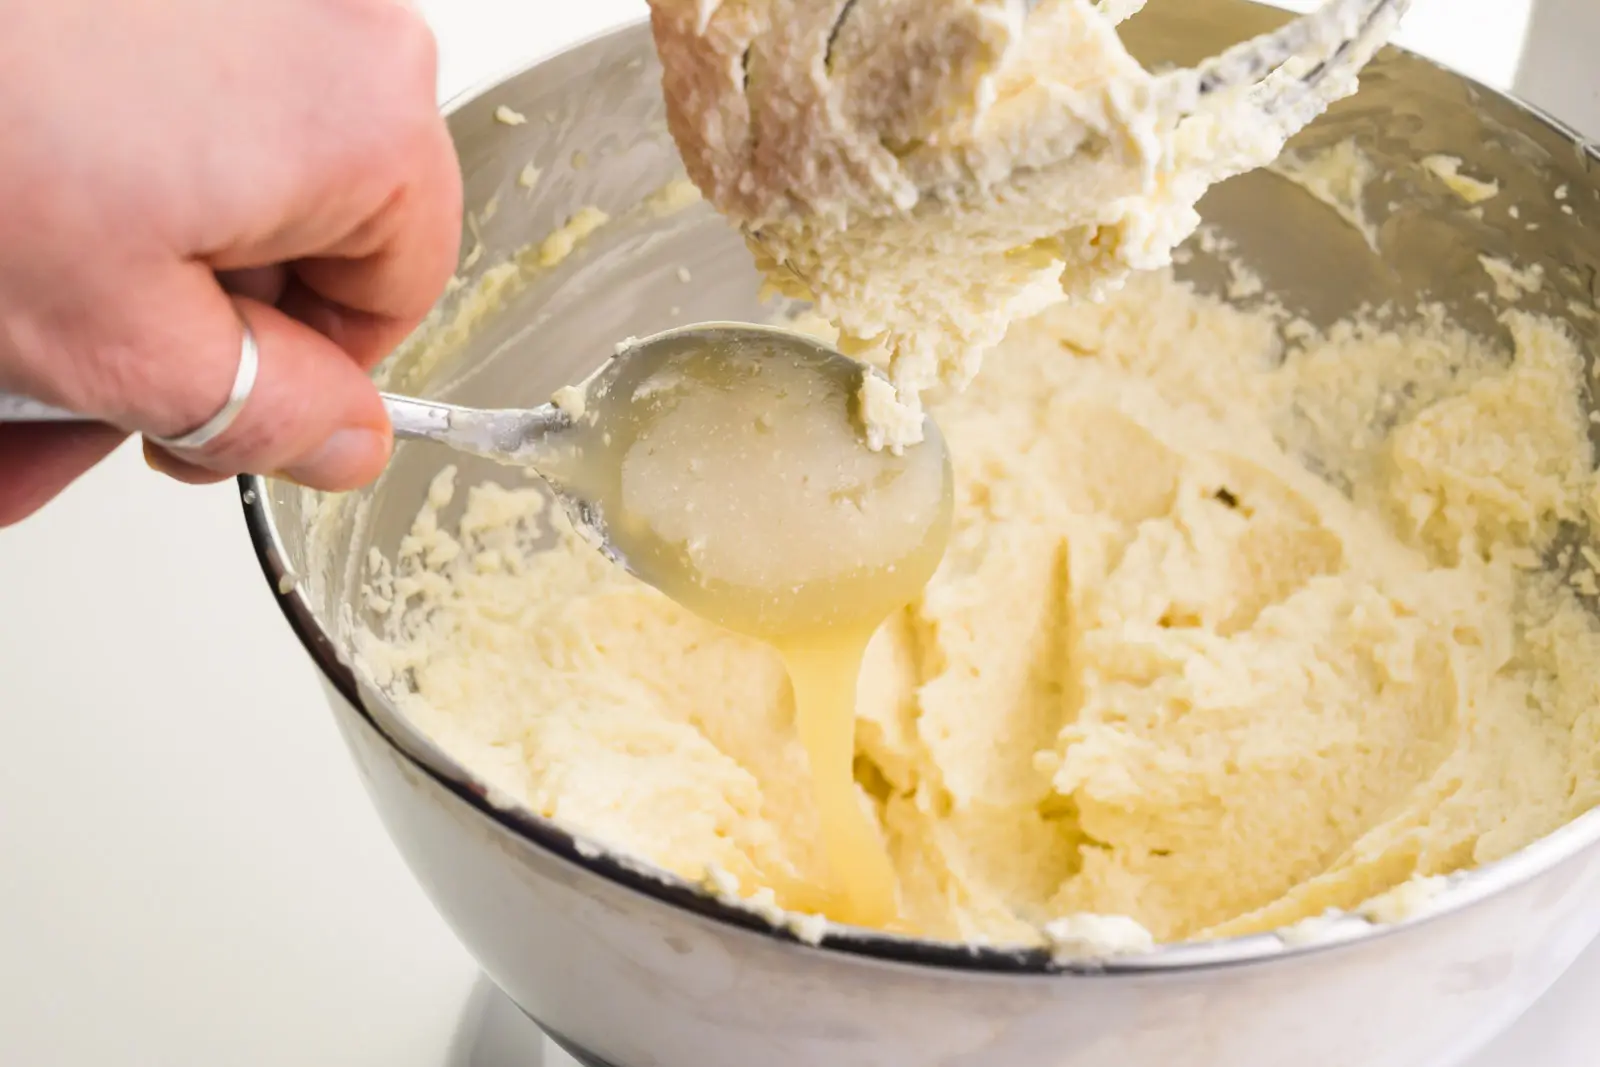 A hand holds a spoon, dripping a creamy mixture in with whipped butter.